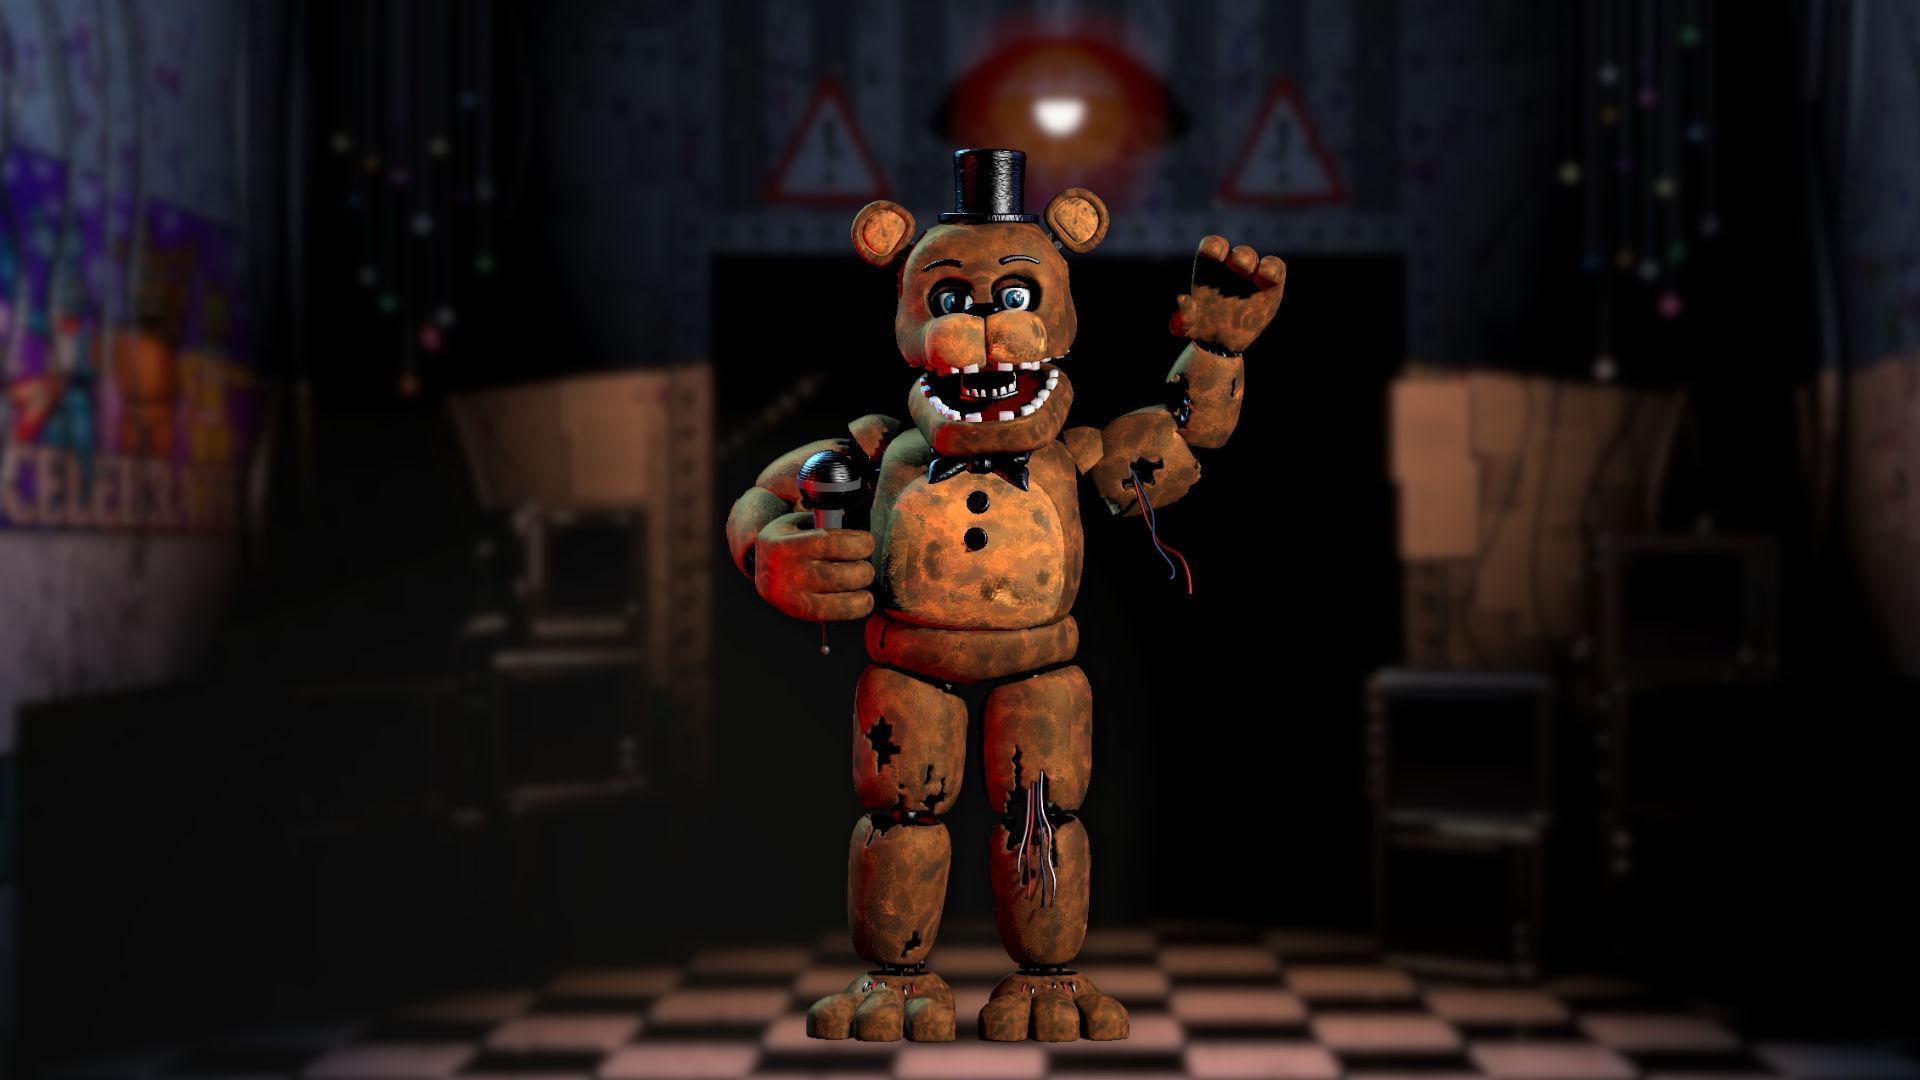 FNaF Character of the Day! on X: Today's FNaF Character of the Day is Withered  Freddy from Five Nights at Freddy's 2! #FNAF  / X